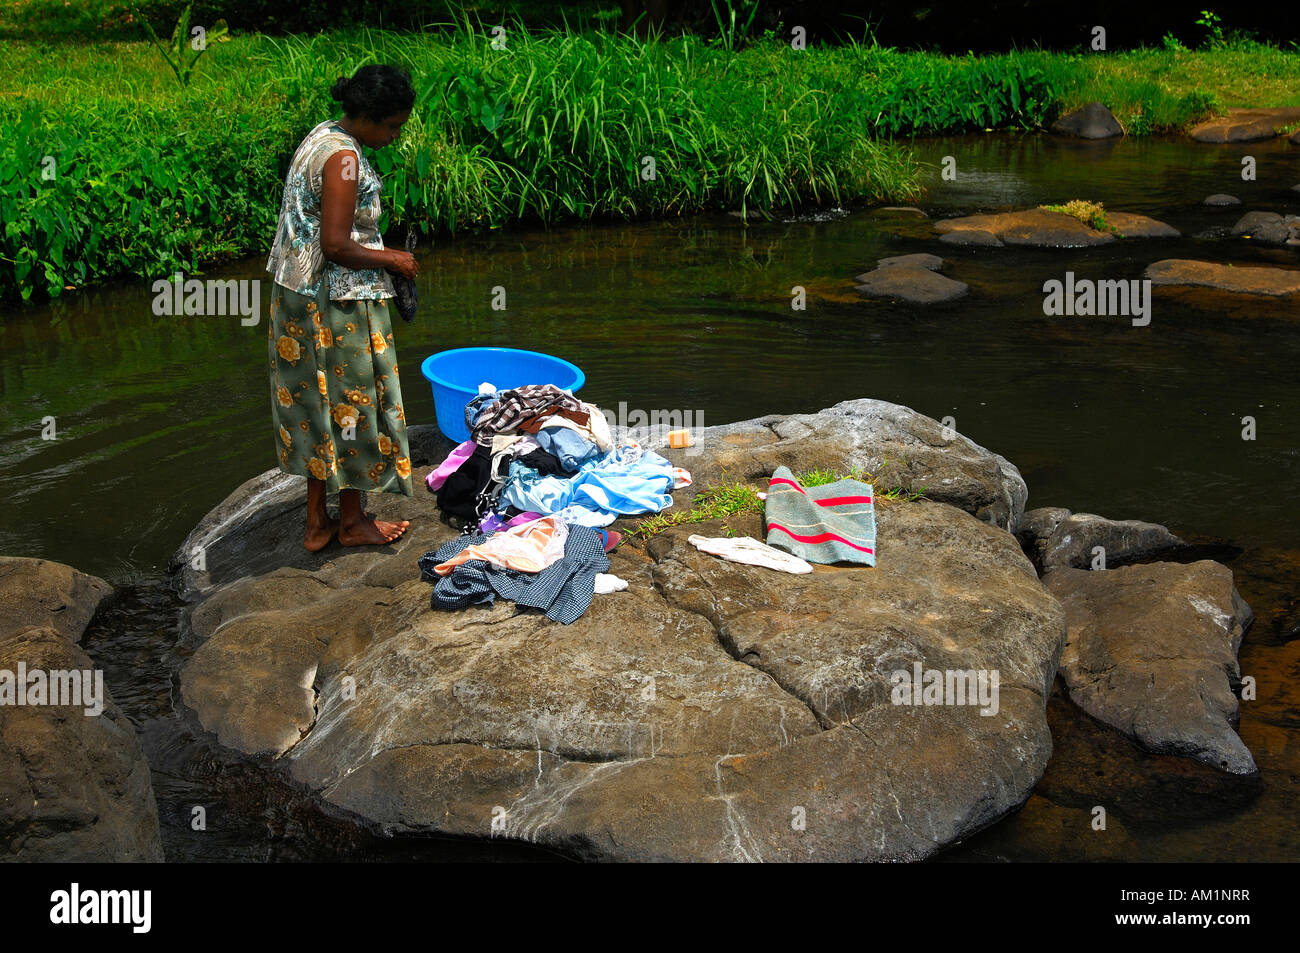 Laundry day by the river, Mauritius Stock Photo